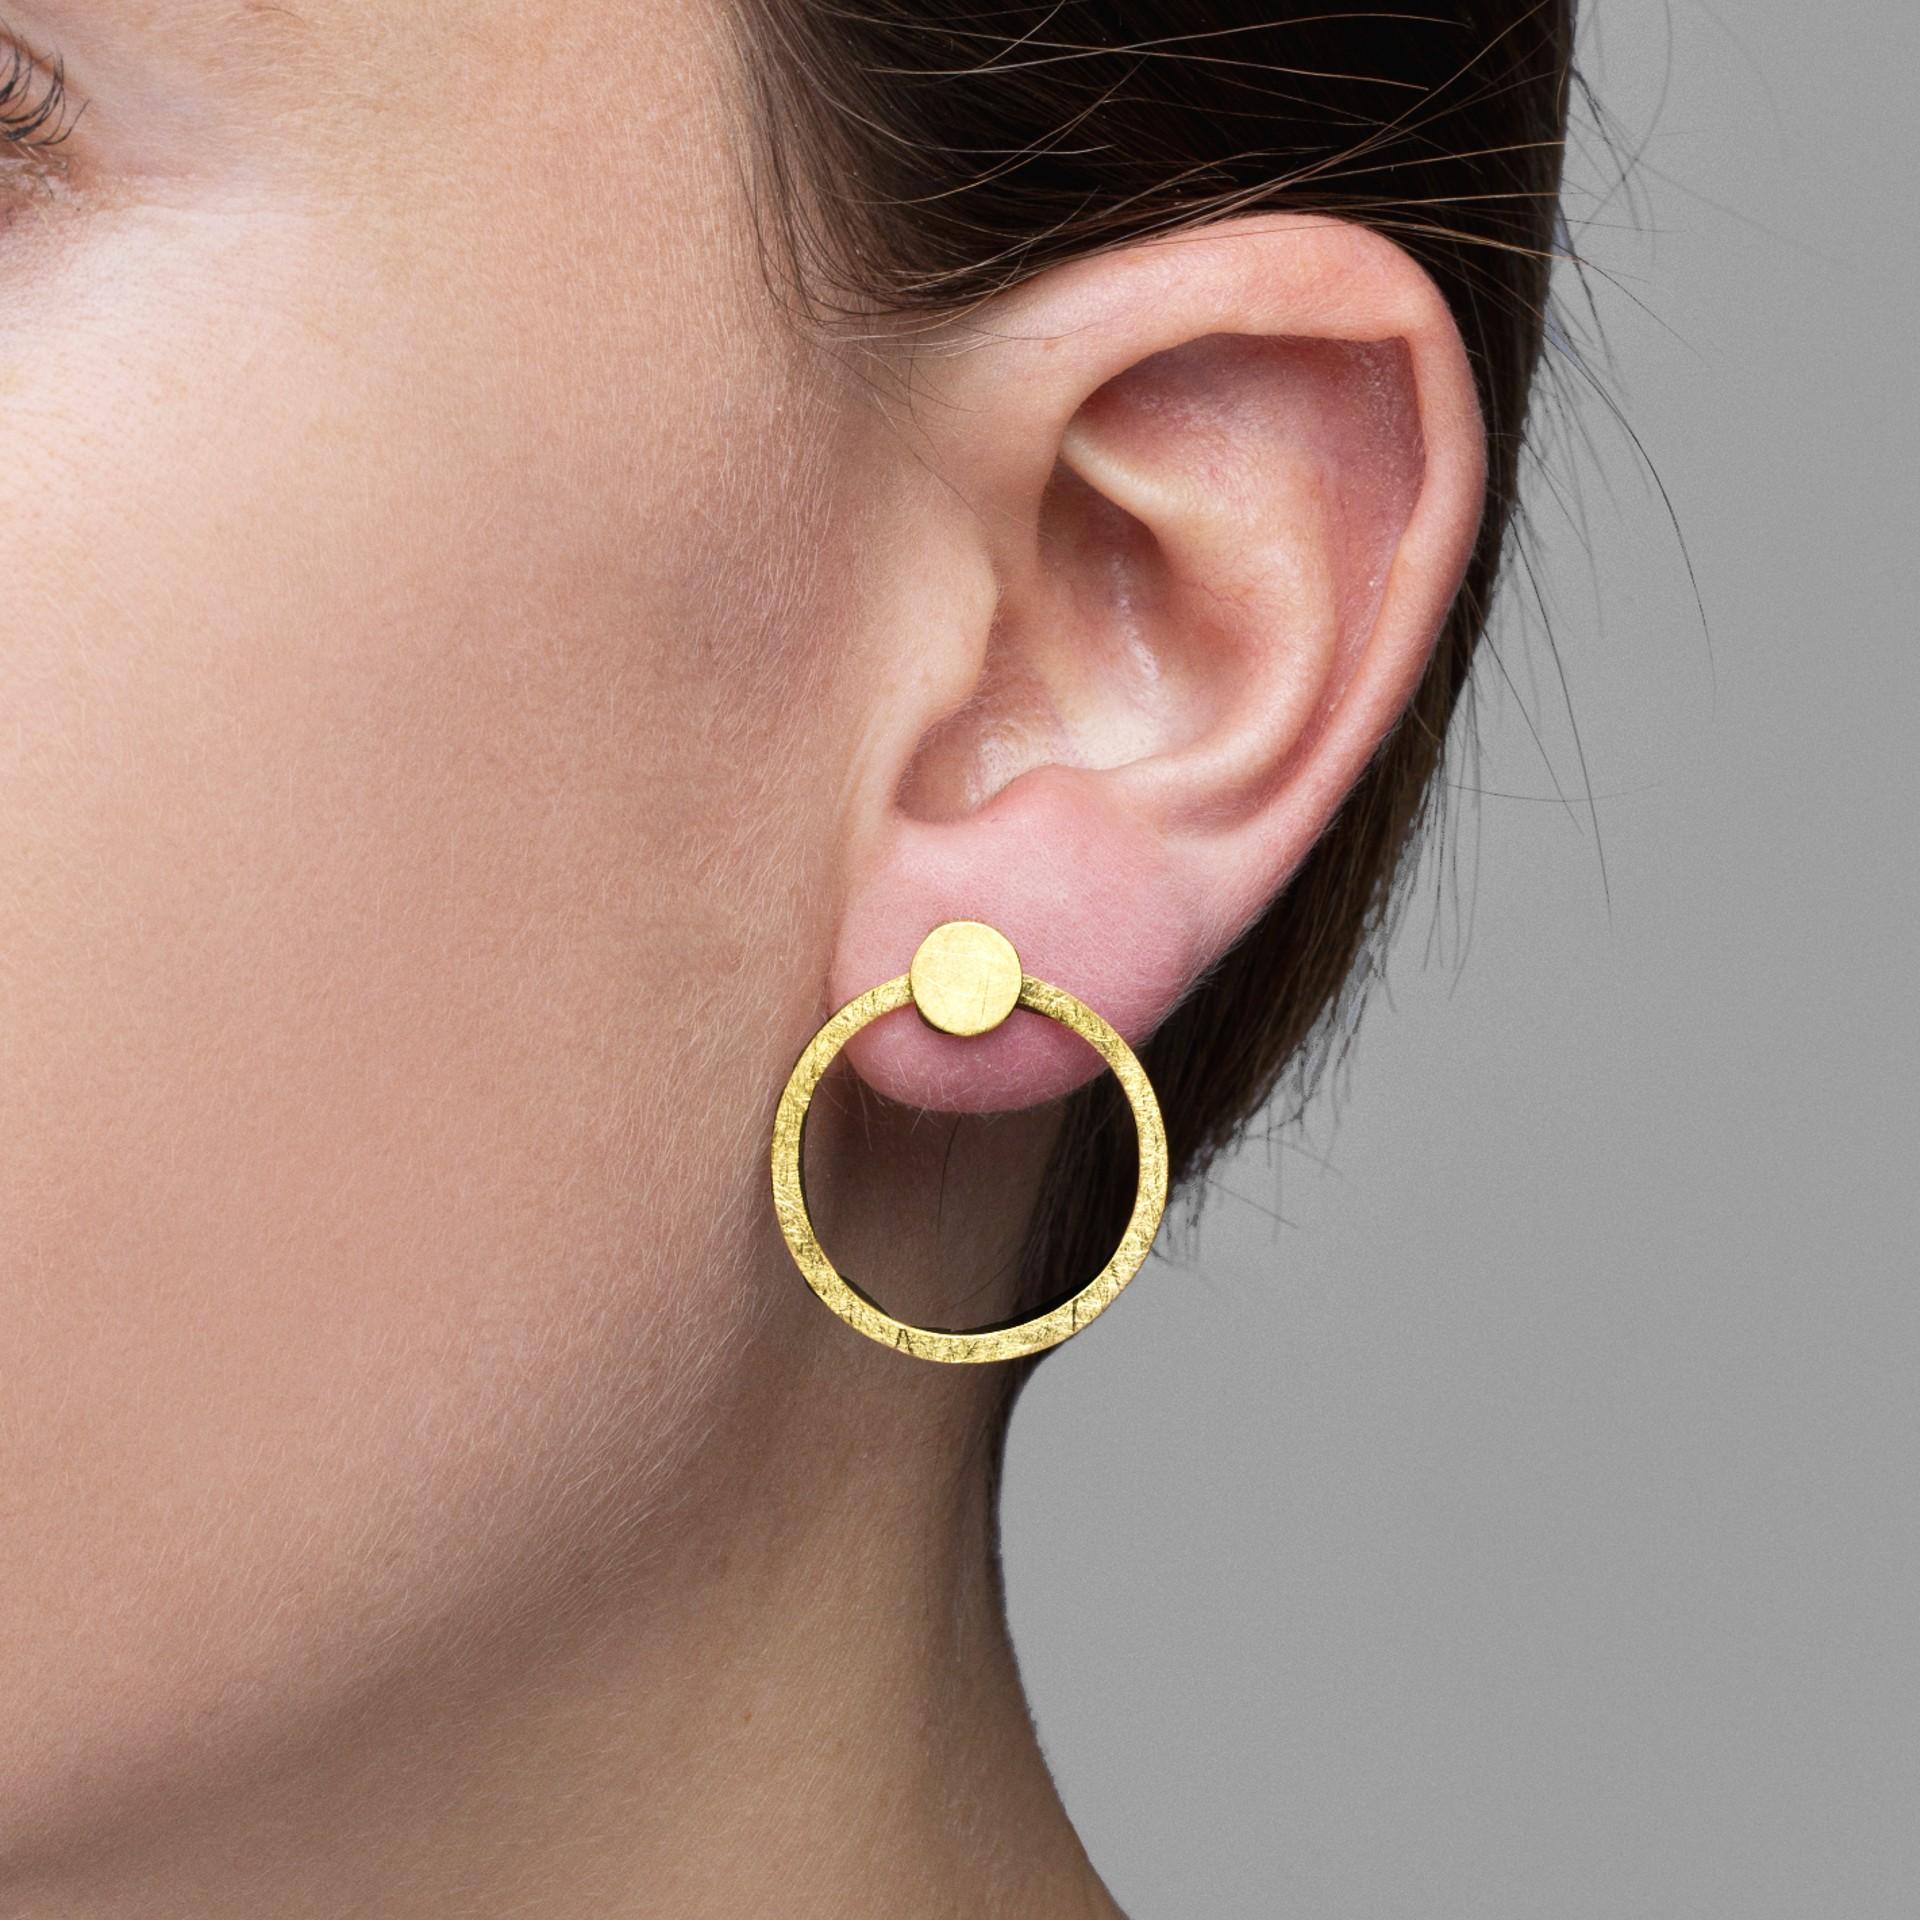 Alex Jona design collection, hand crafted in Italy, 18 karat brushed yellow gold hoop pendant earrings.
Dimensions: W 0.78in/19mm, D 0.08in/2.18mm.

Alex Jona jewels stand out, not only for their special design and for the excellent quality of the